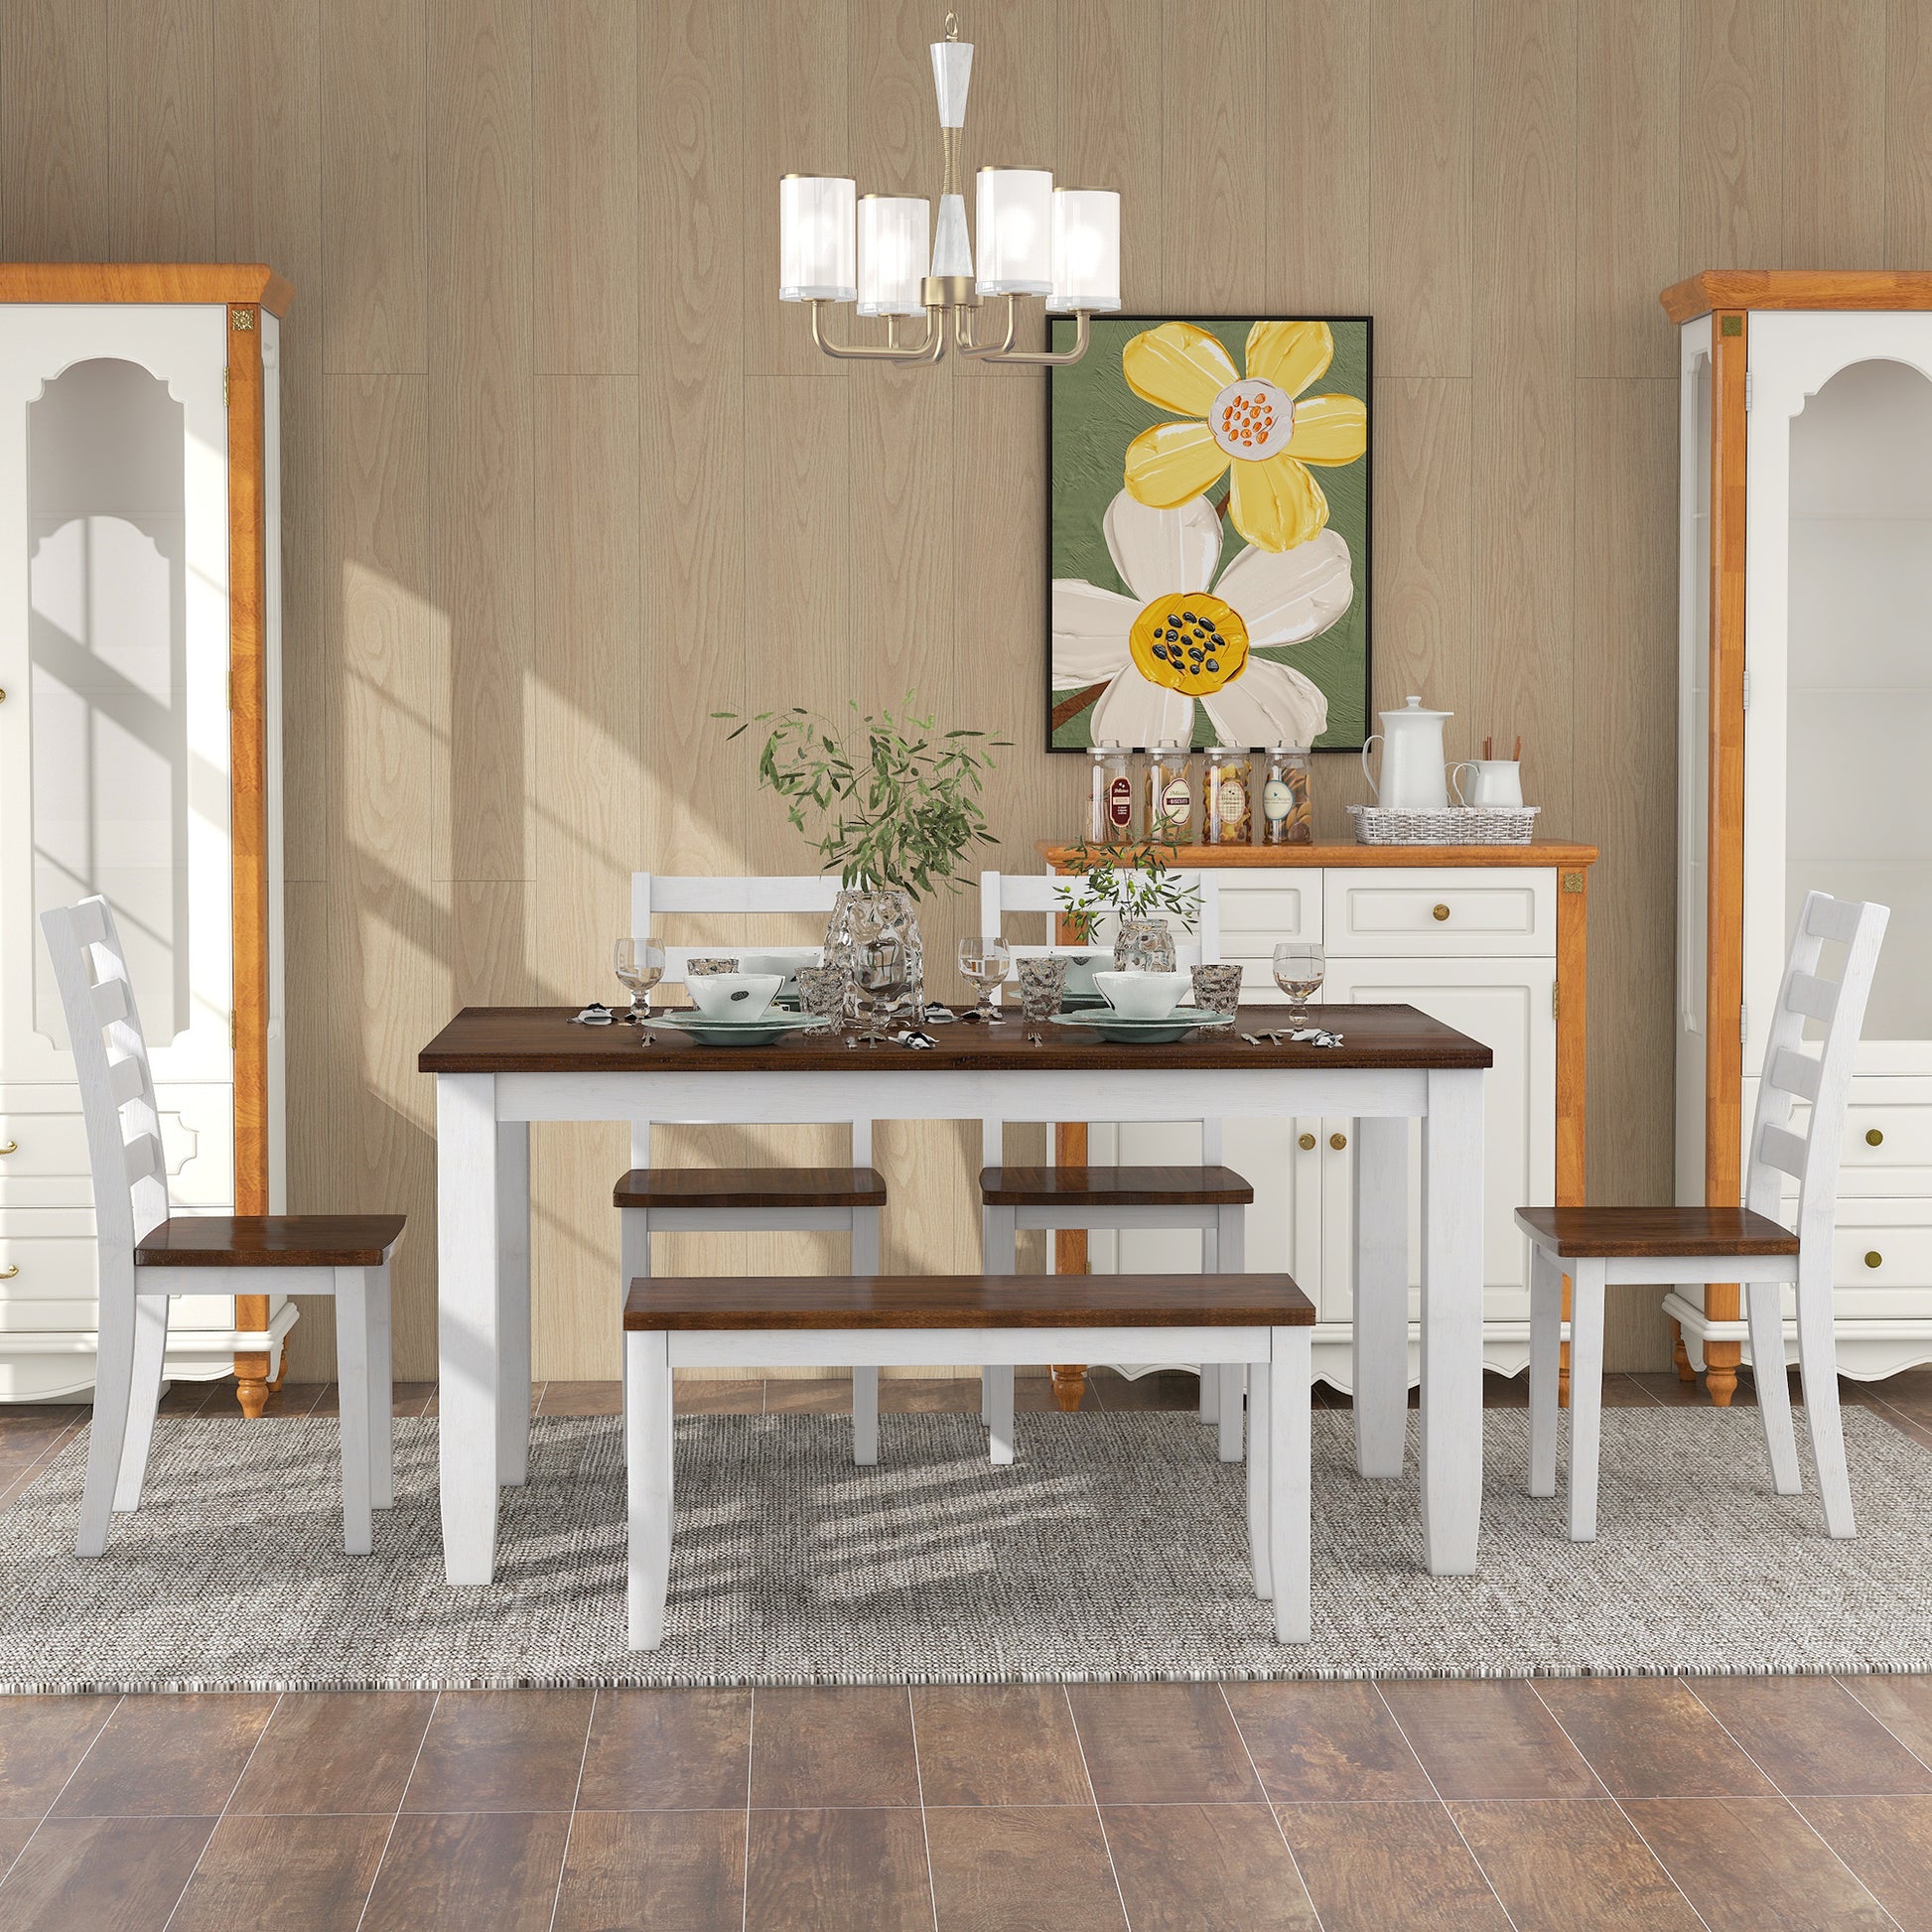 TREXM Rustic Style 6-Piece Dining Room Table Set with 4 Ergonomic Designed Chairs & a Bench Walnut + Cottage White